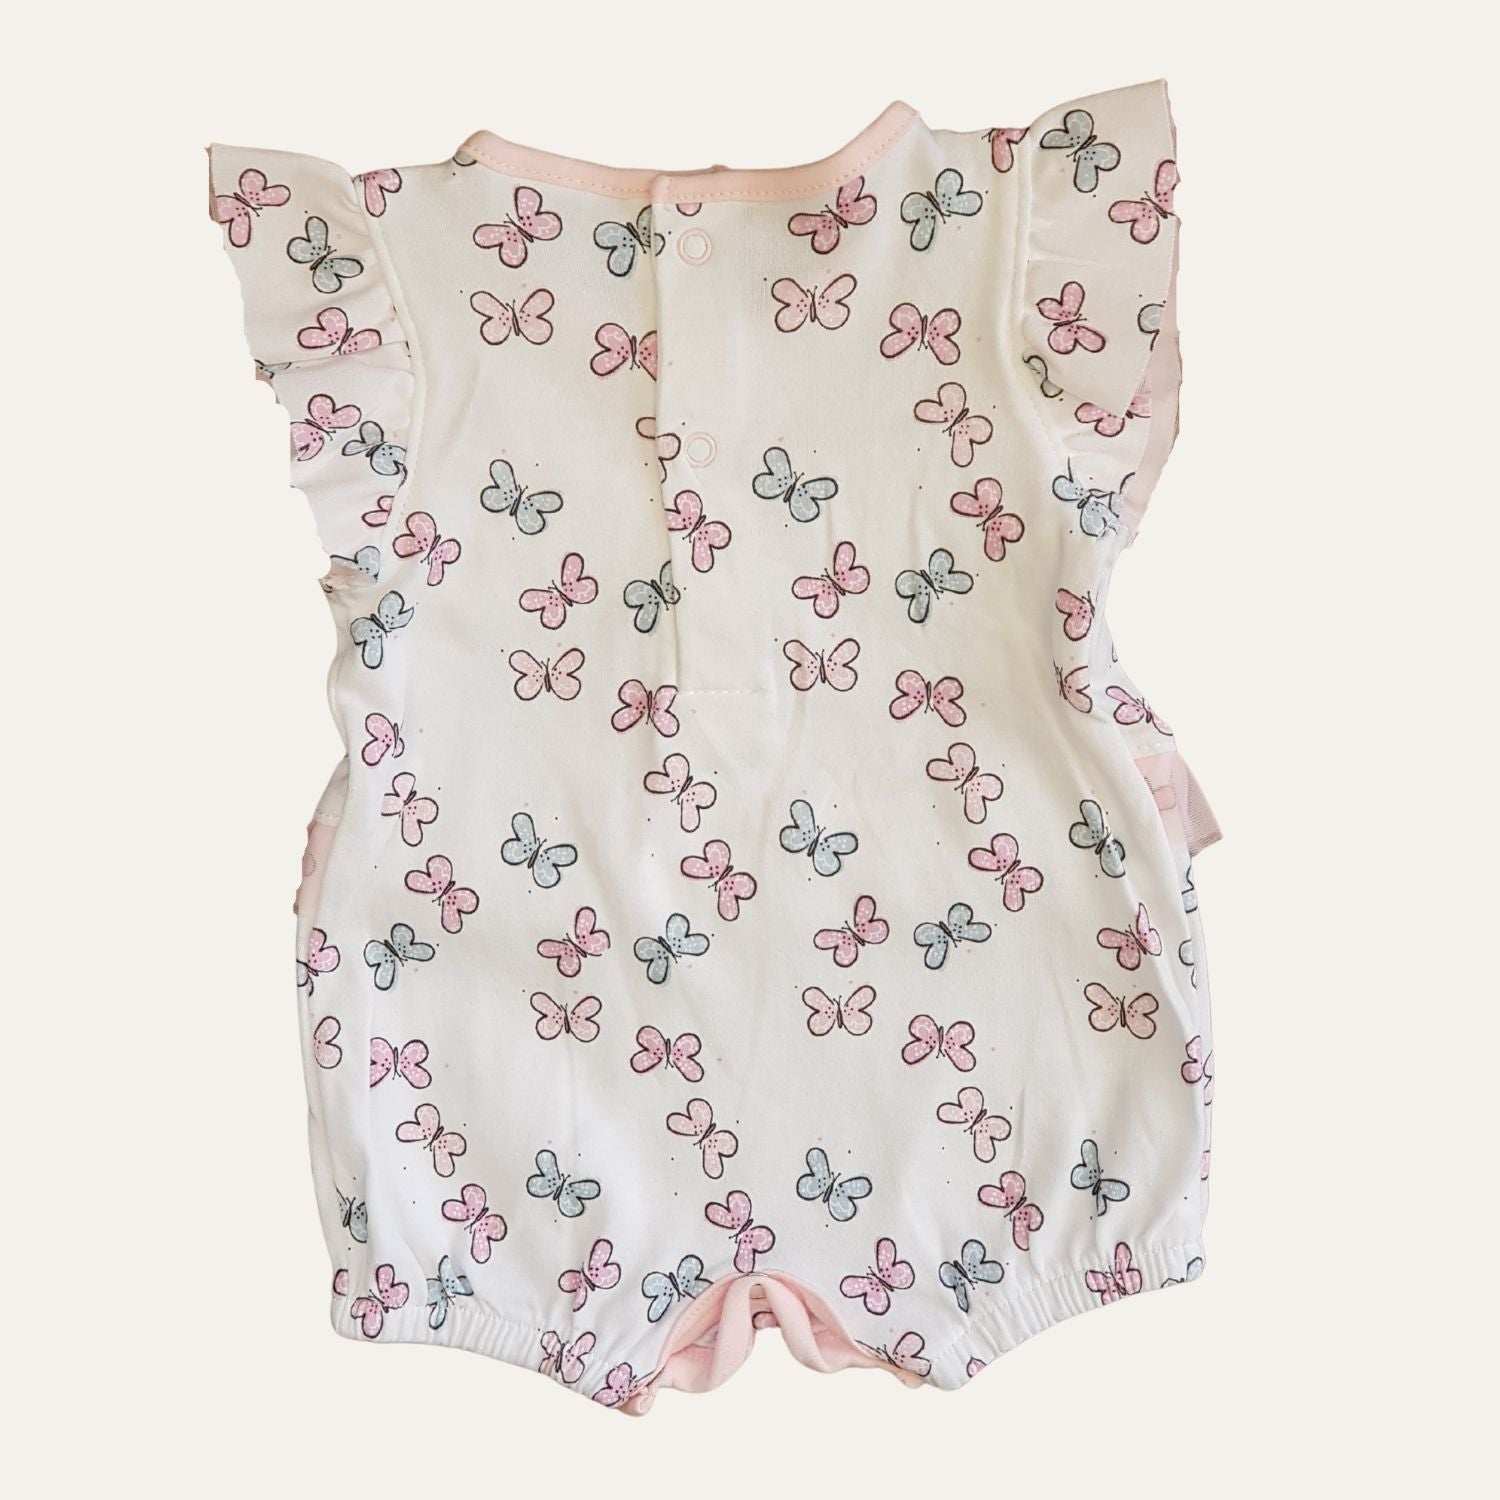 Cute and Fashionable Romper for Your Little Girl